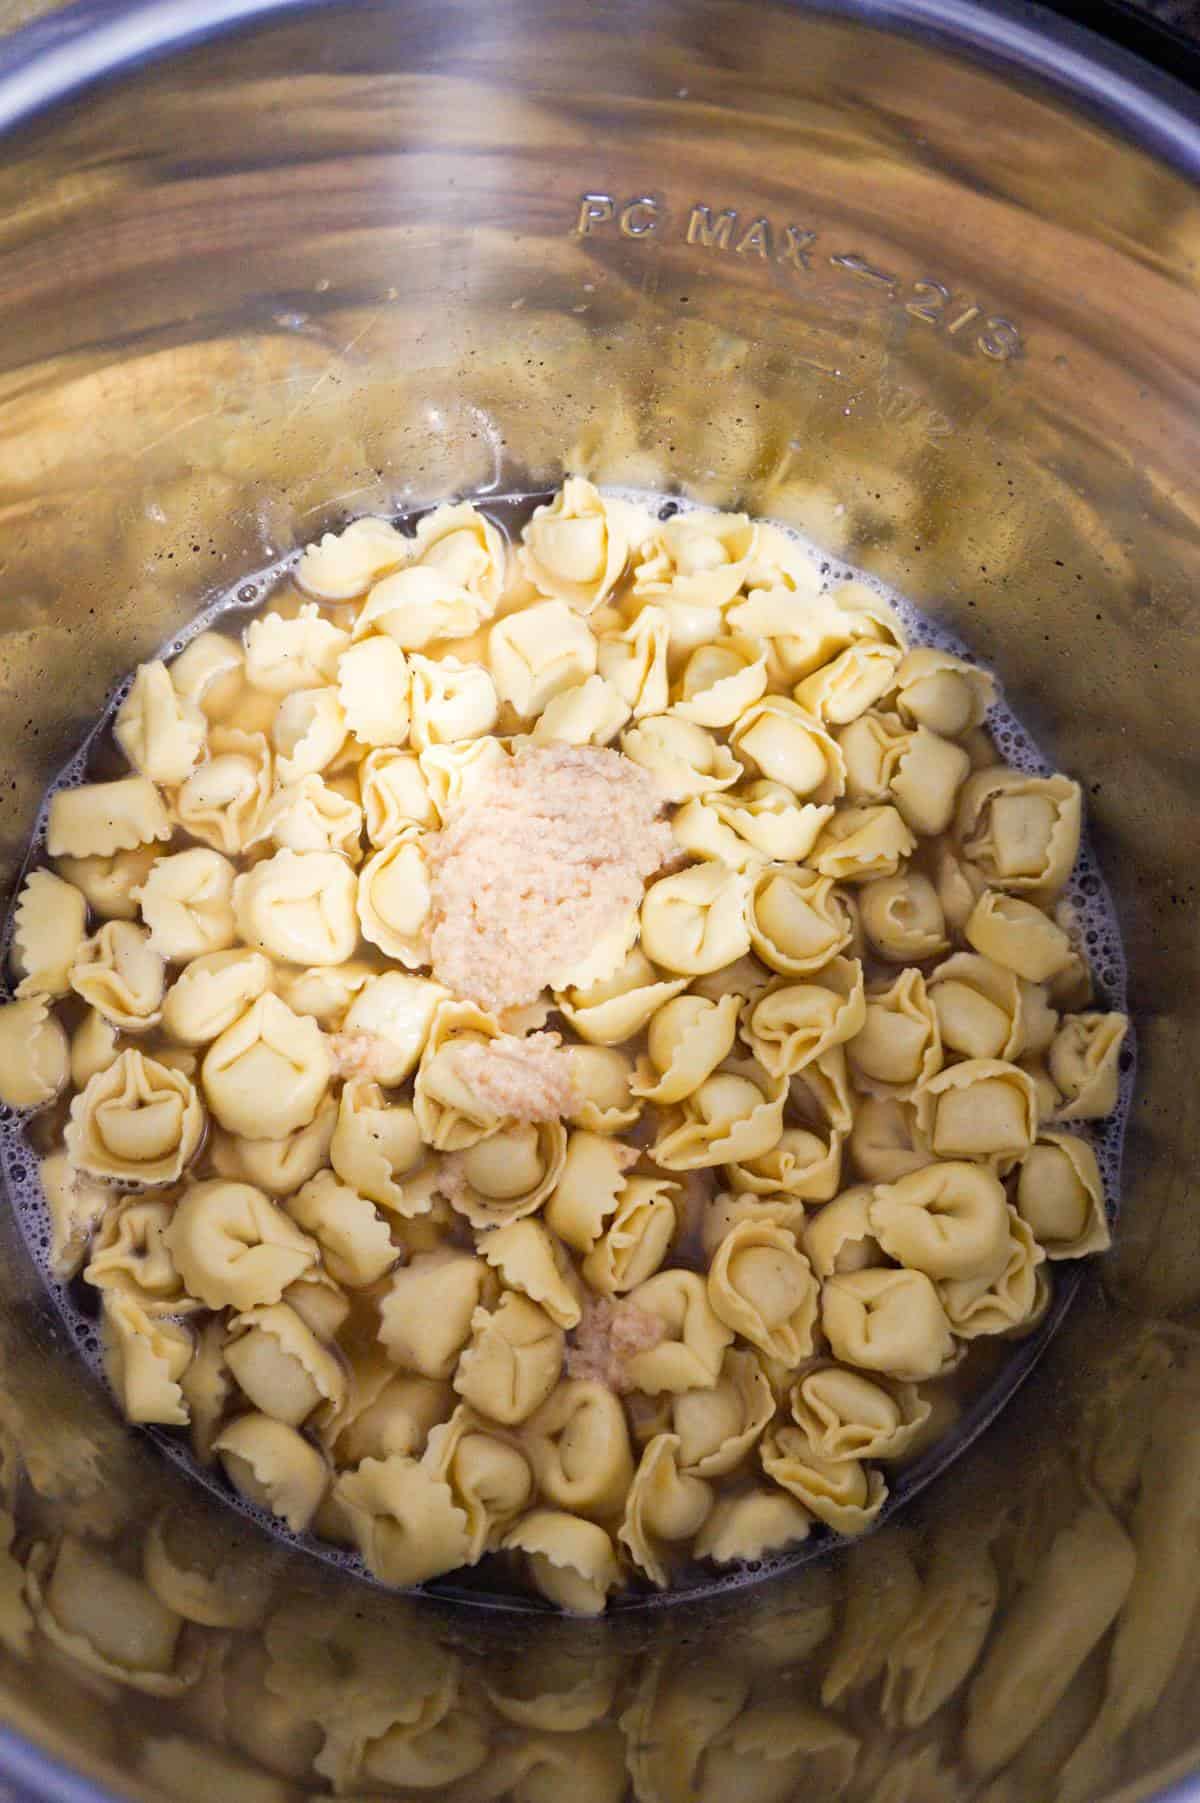 garlic puree on top of uncooked tortellini in an Instant Pot